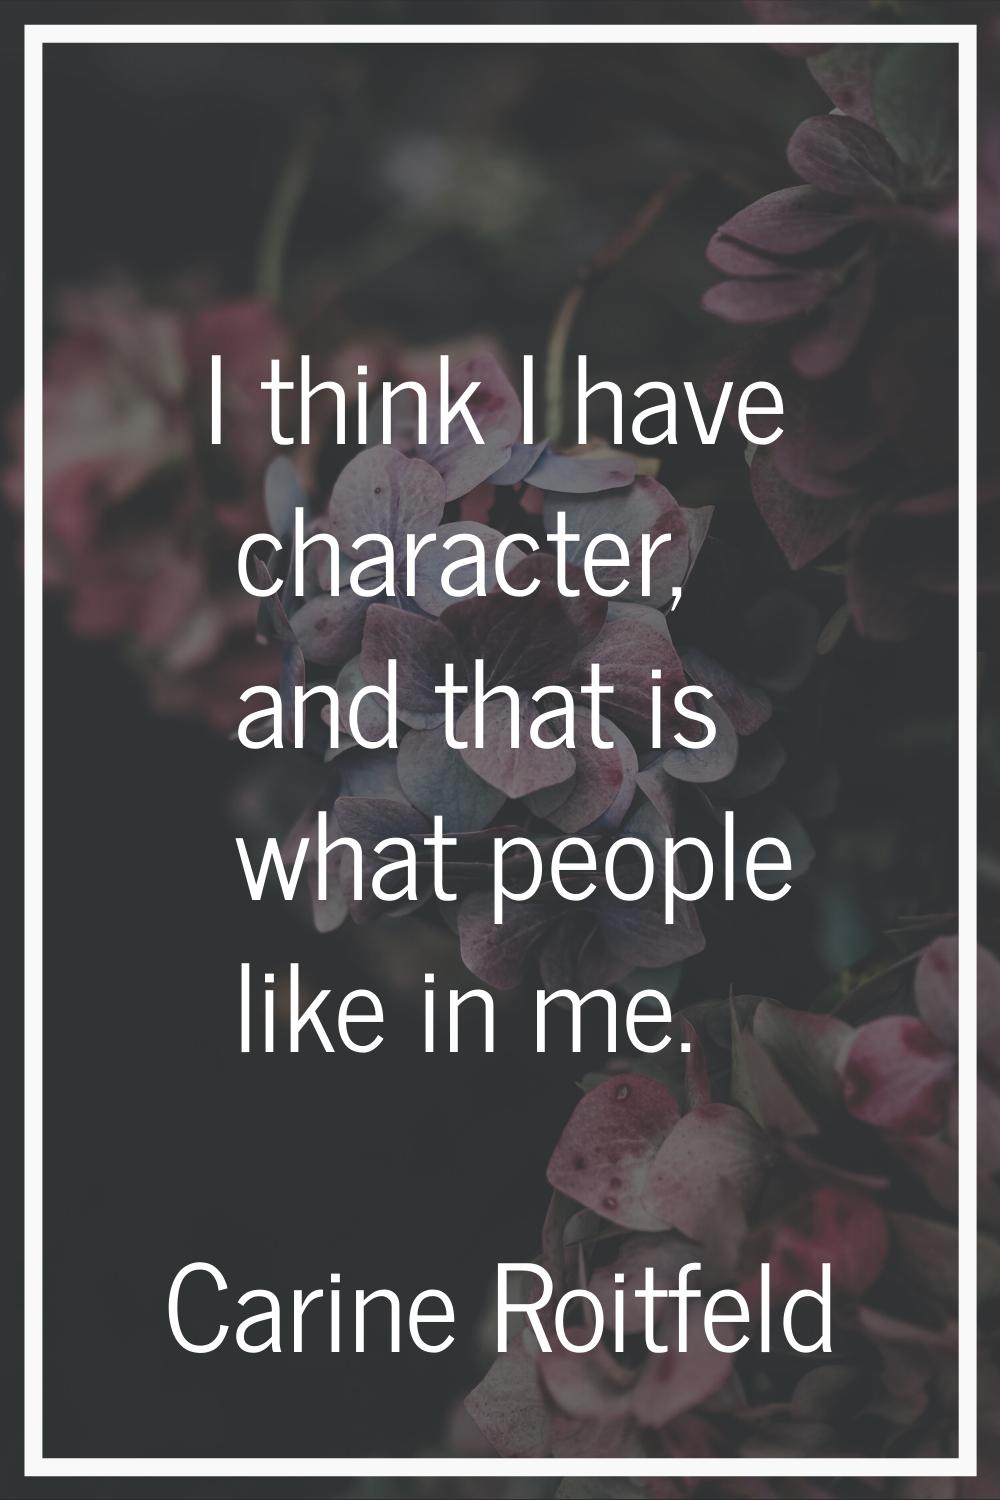 I think I have character, and that is what people like in me.